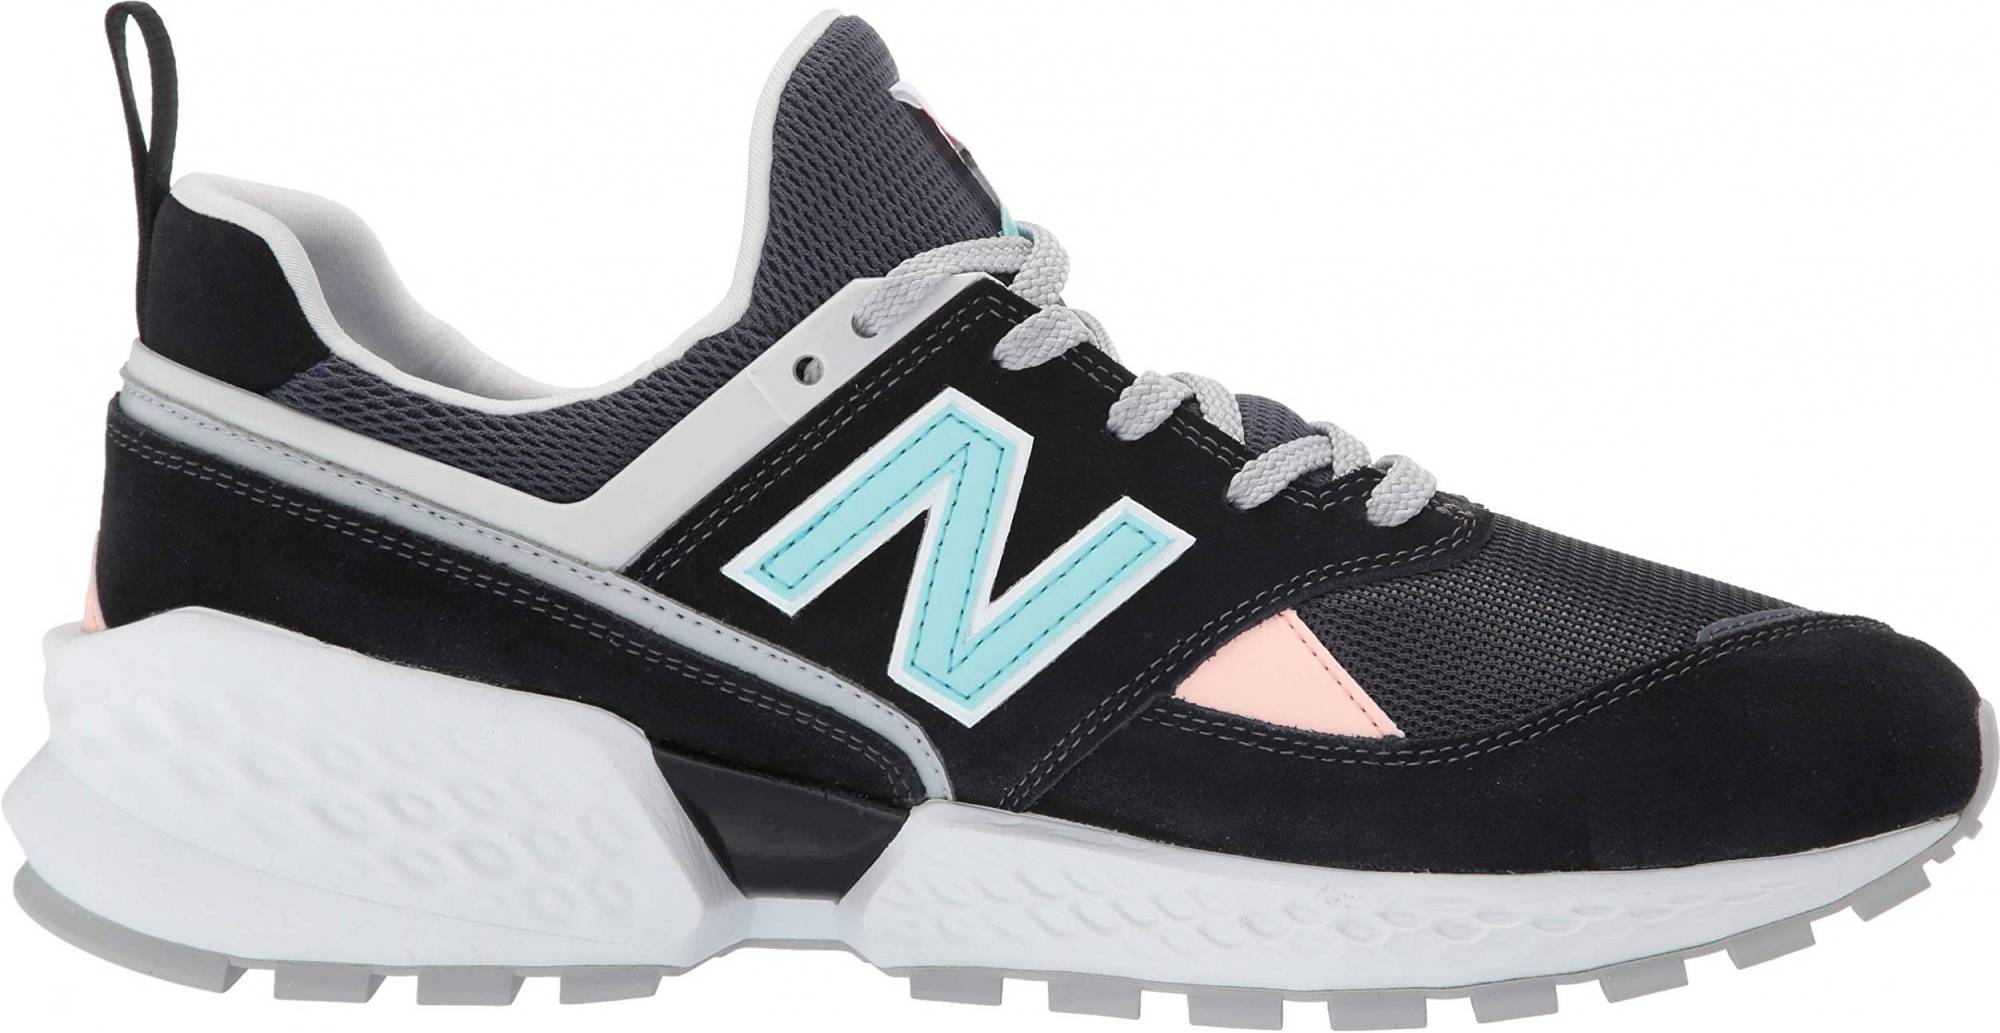 New Balance 574 Sport v2 – Shoes Reviews & Reasons To Buy